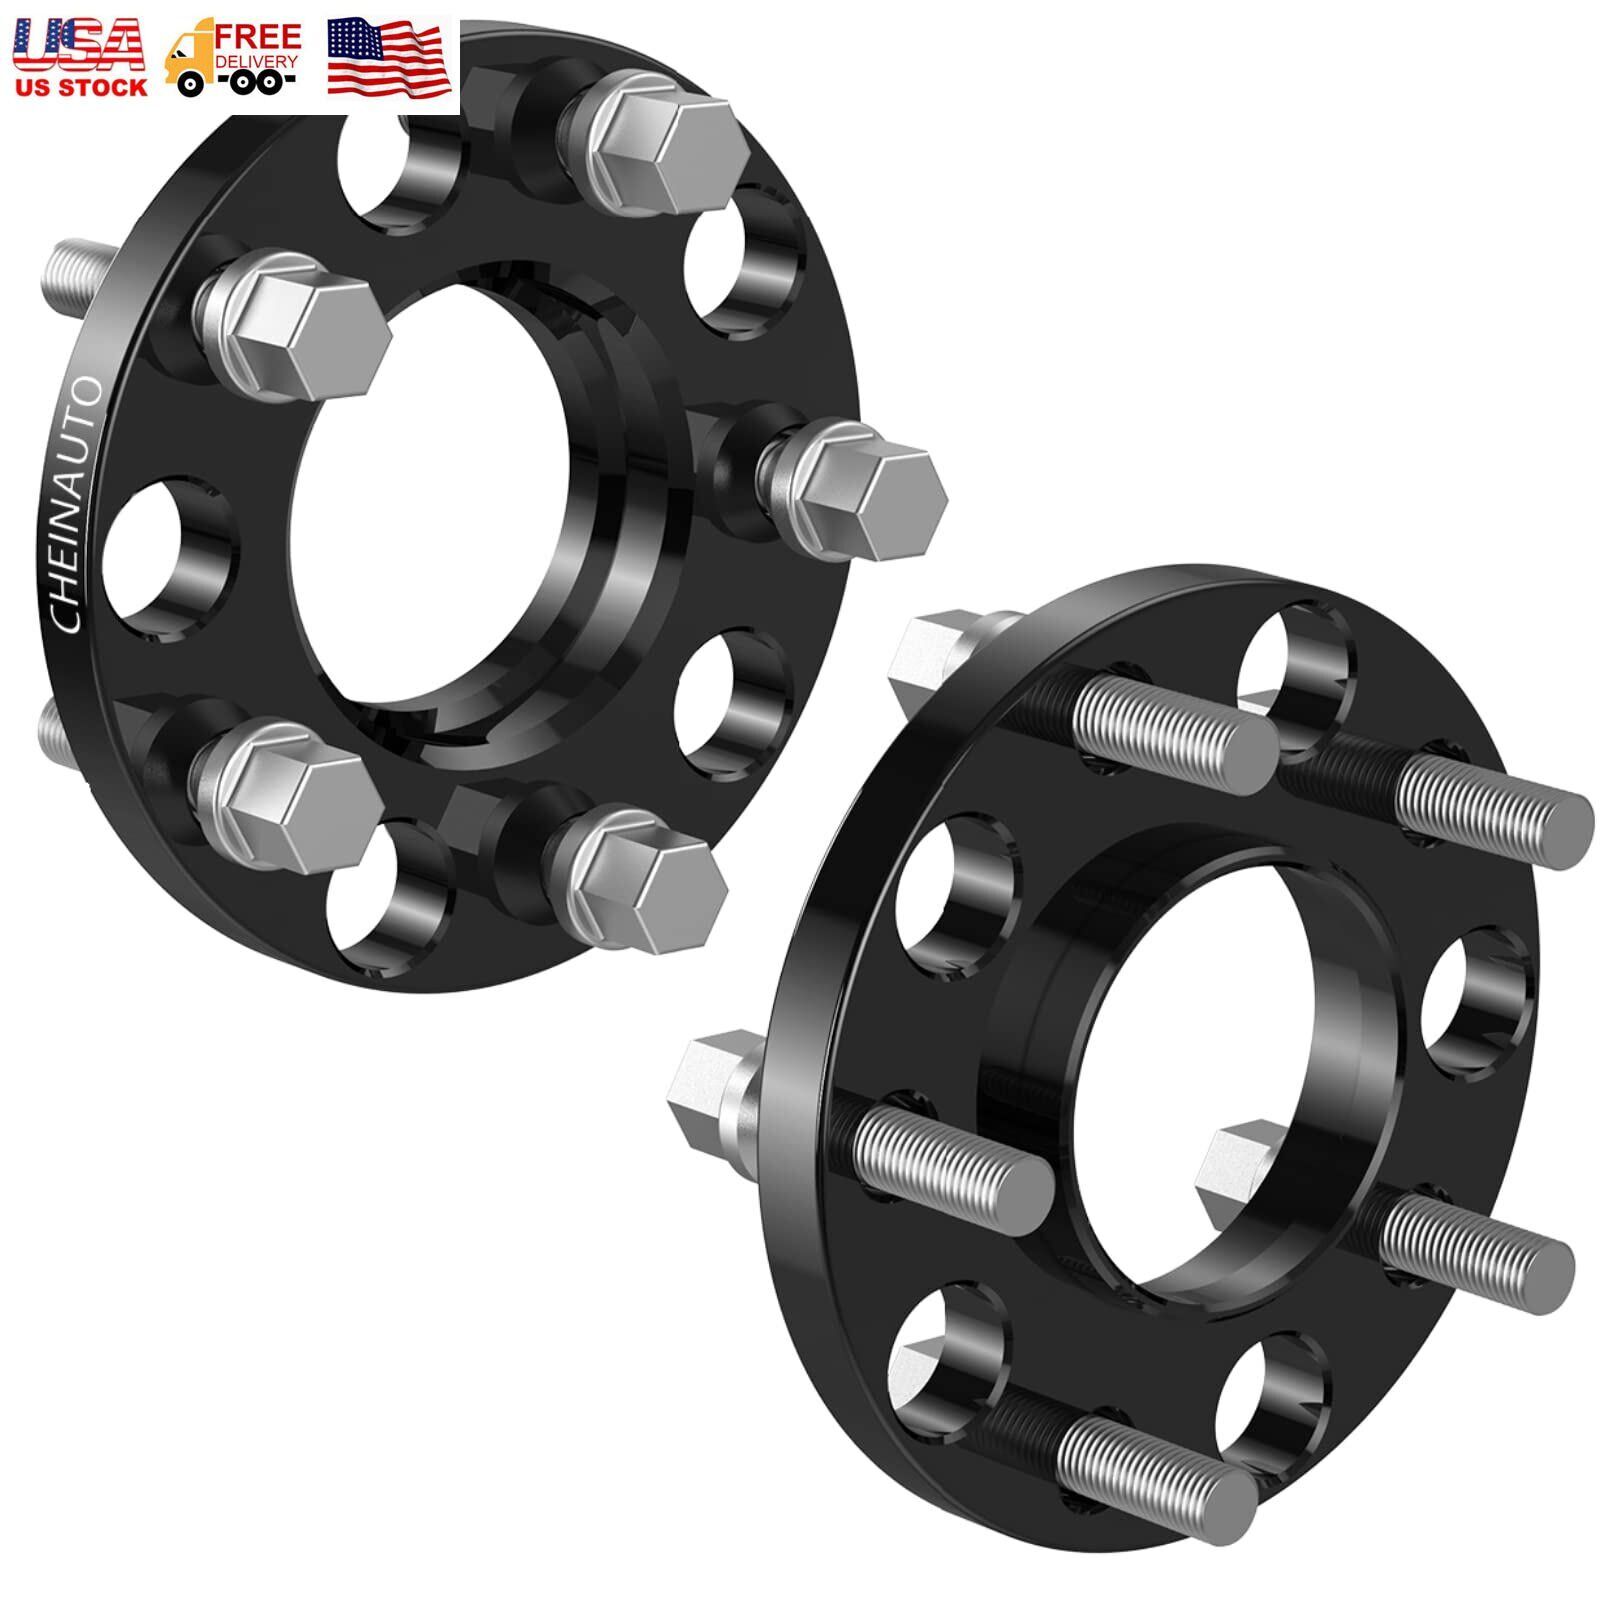 2PC 15mm 5x120mm Hubcentric Wheel Spacers 72.56mm CB For BMW E82 E88 850ci New